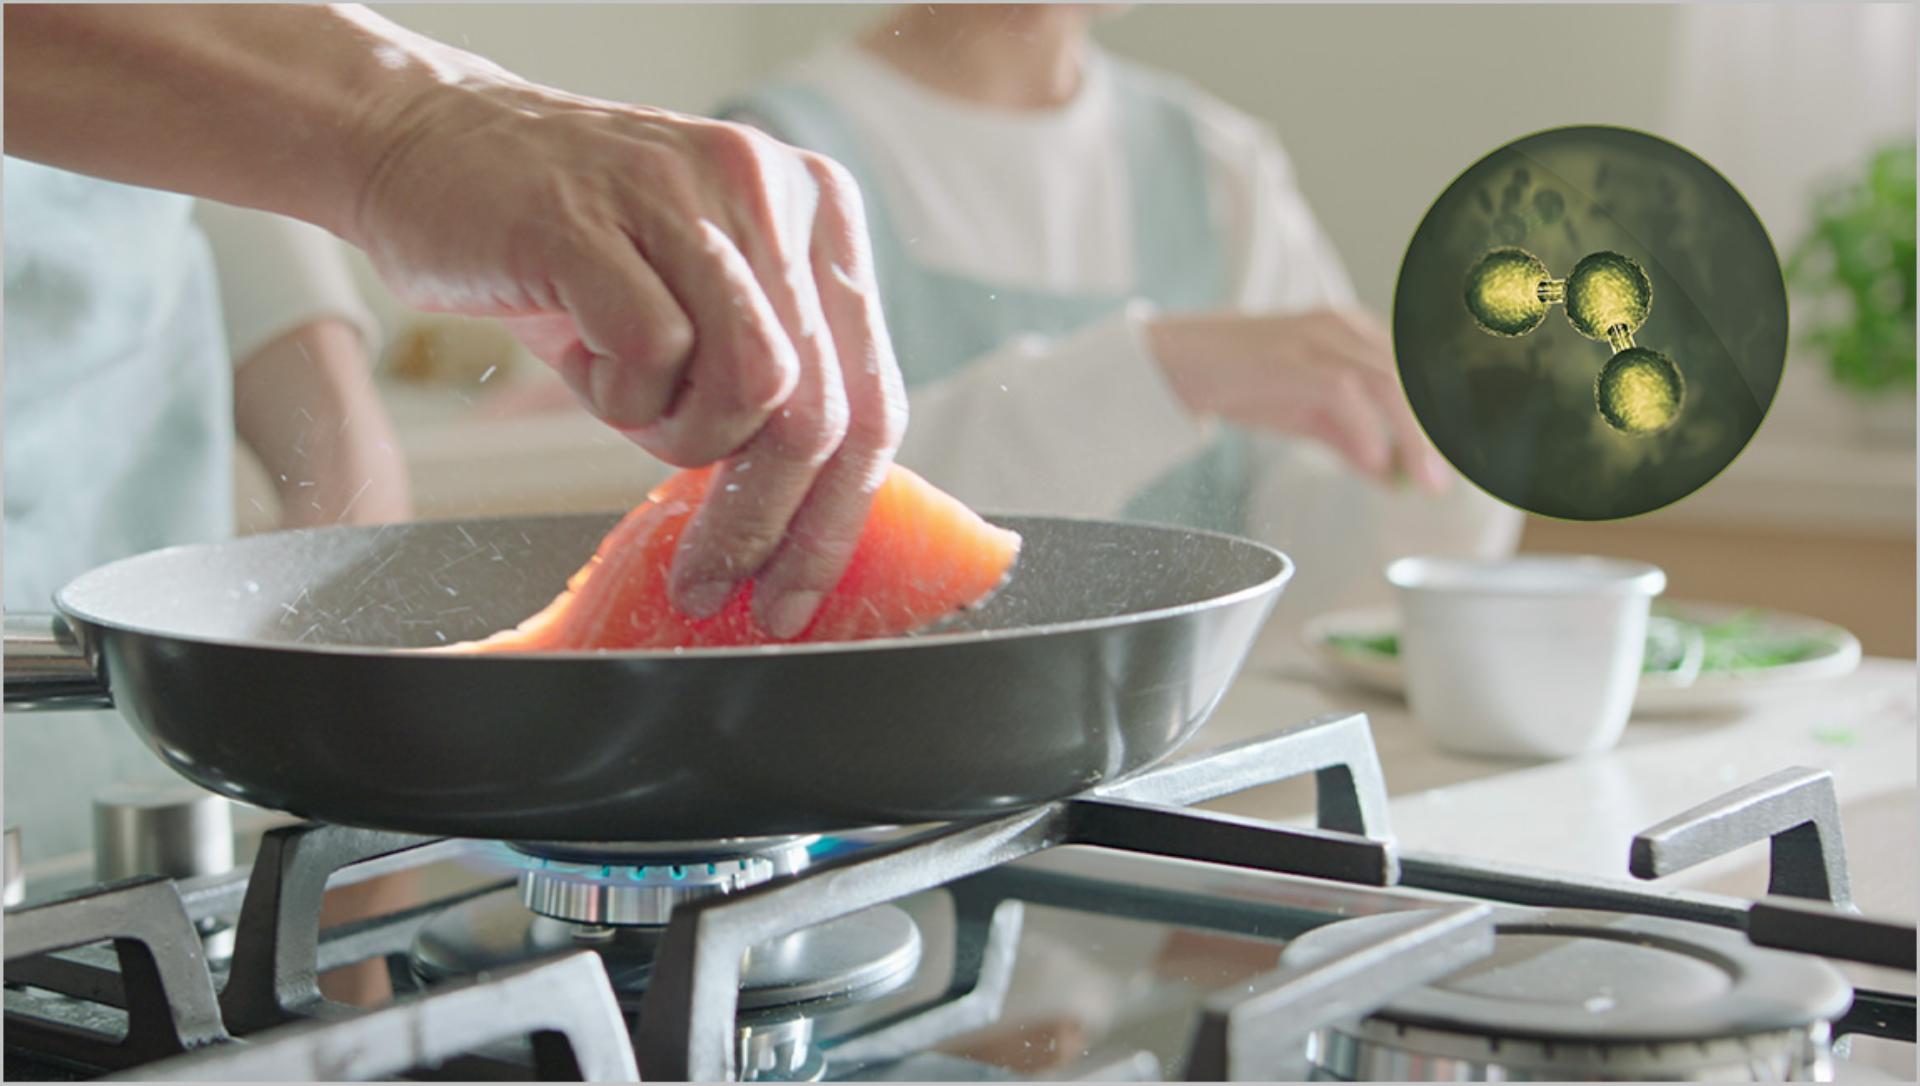 Air purifiers remove cooking odours and oil particles released into the air when frying food